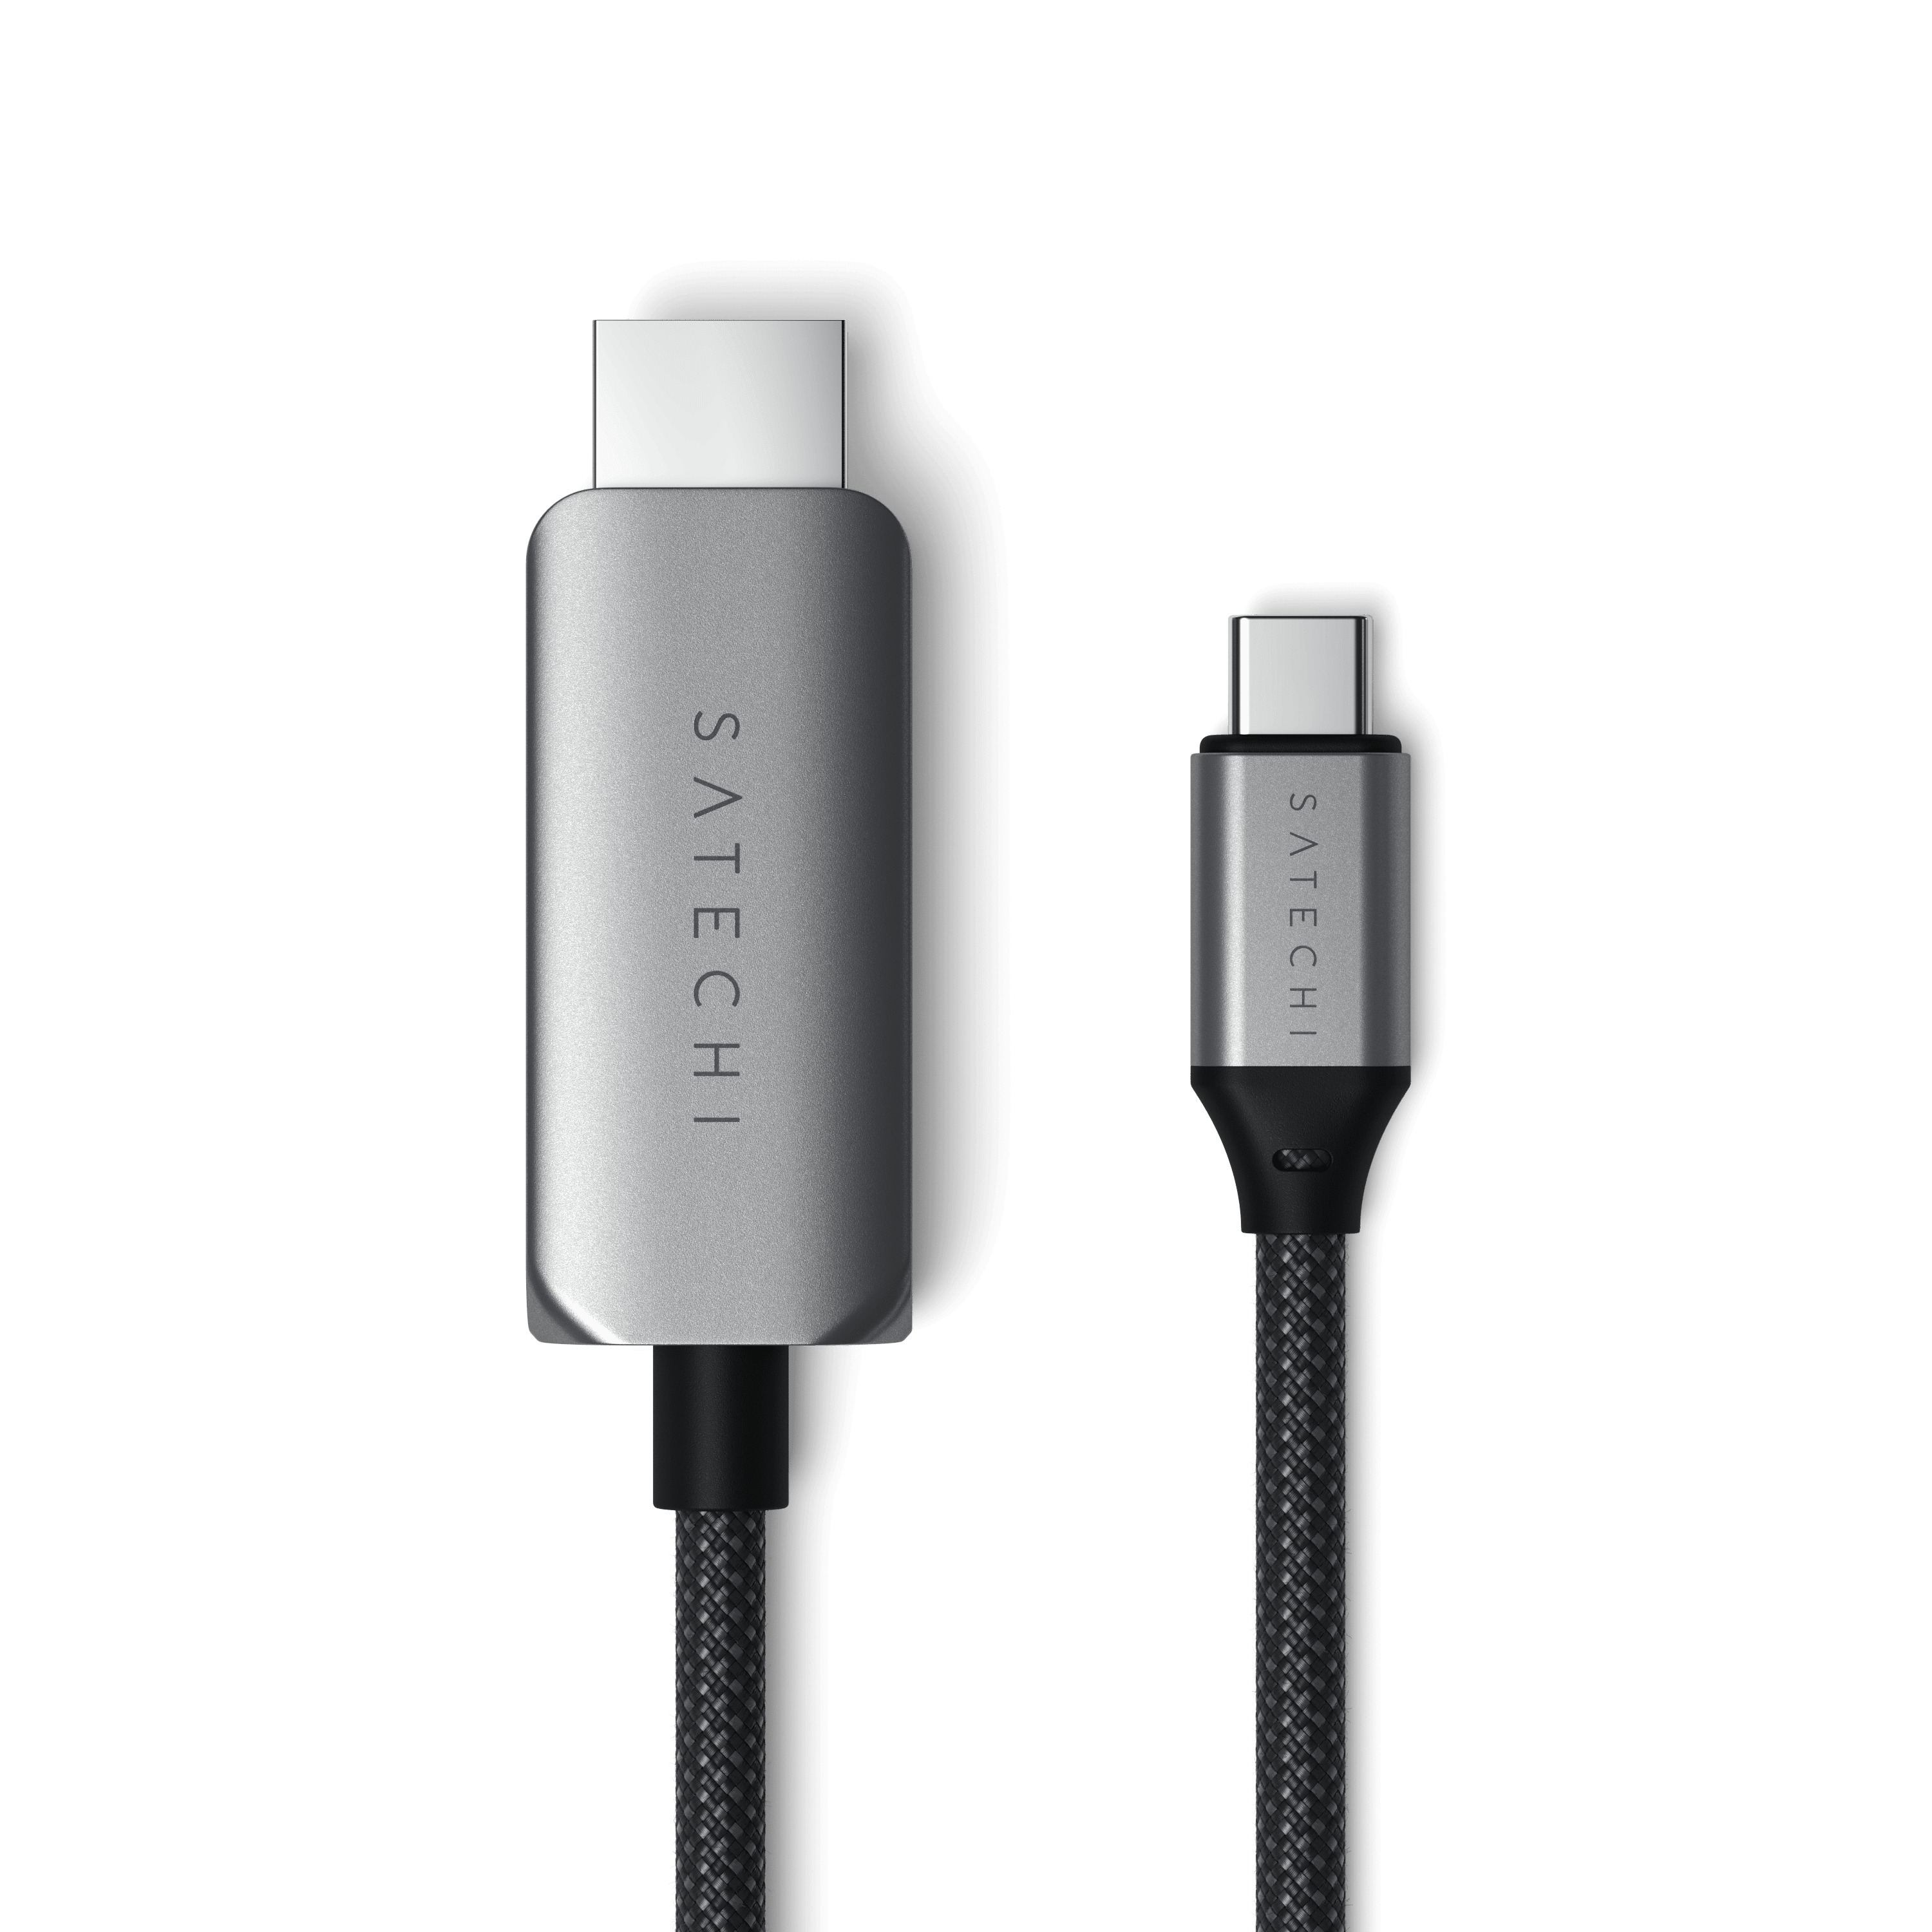 https://cdn.shopify.com/s/files/1/1520/4366/files/usb-c-to-hdmi-21-8k-cable-cables-satechi-402222.png?v=1701927733